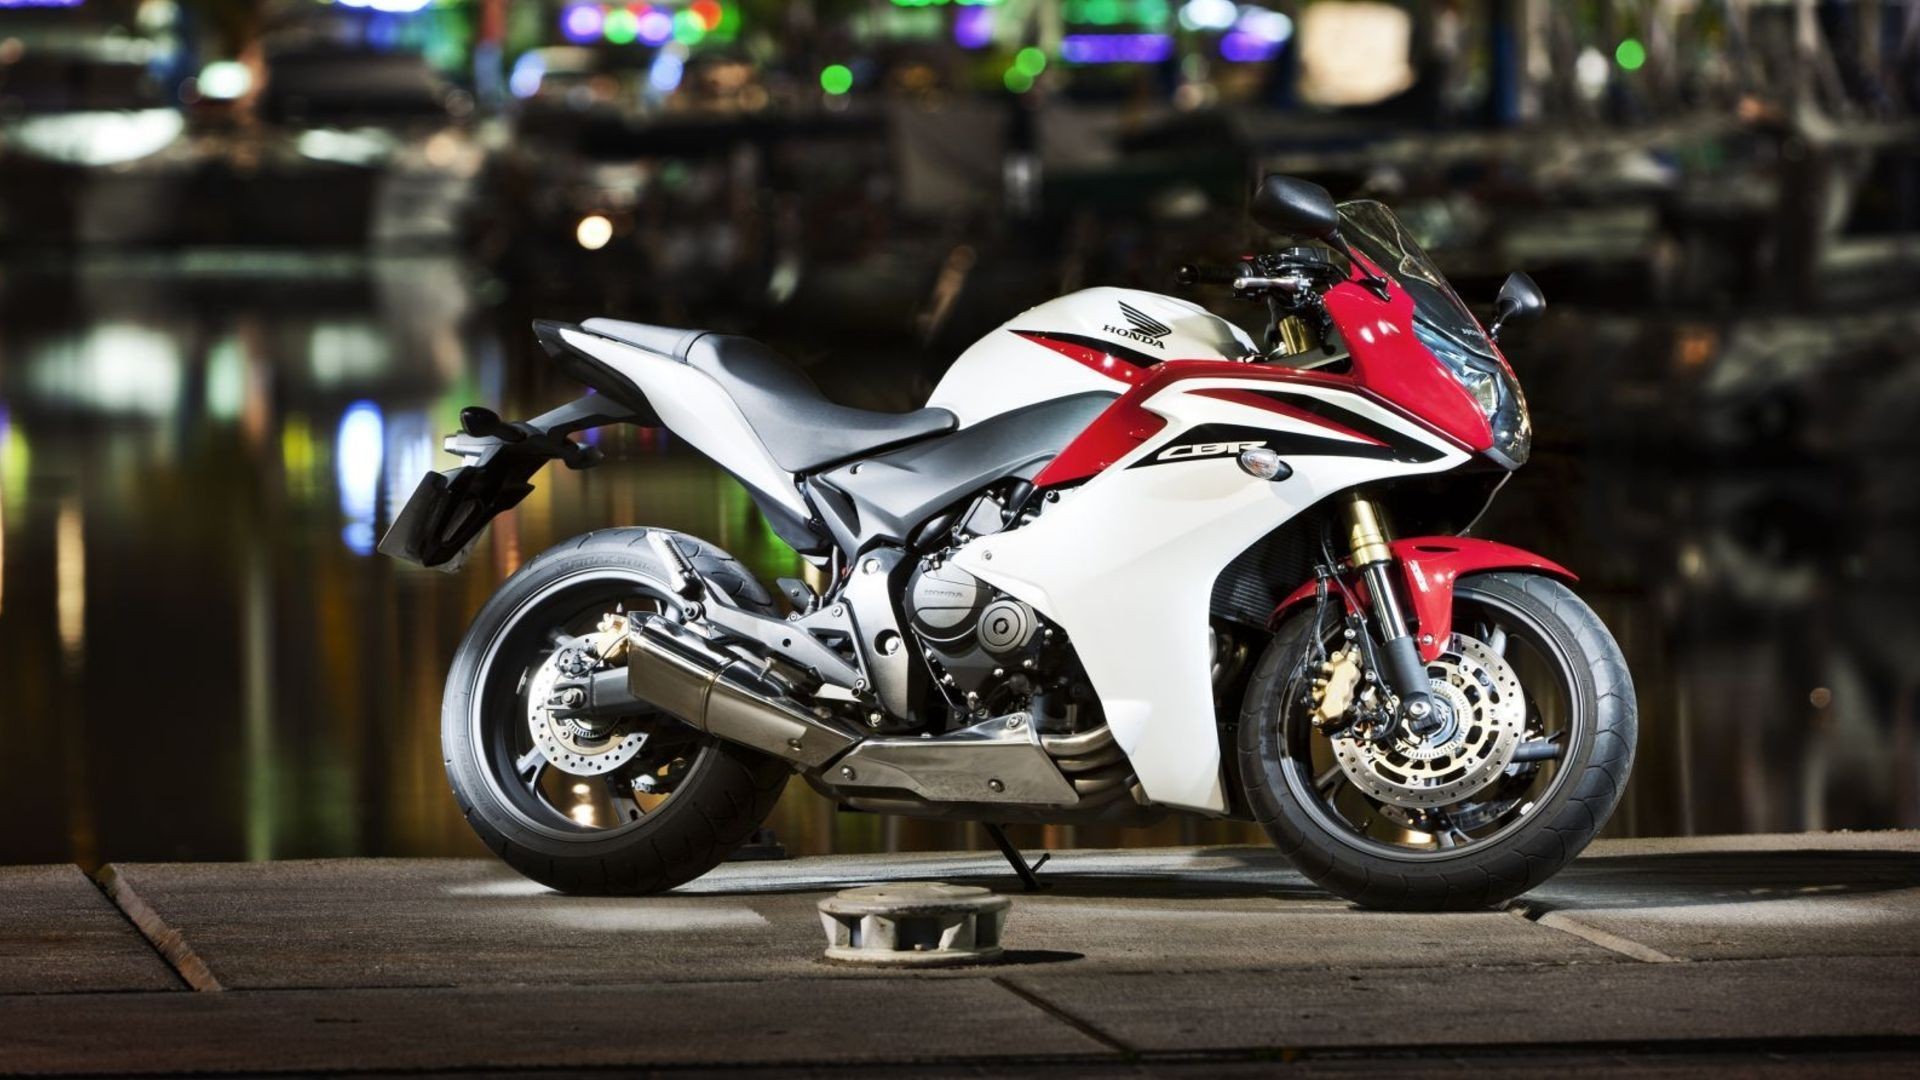 Honda CBR in red and white.